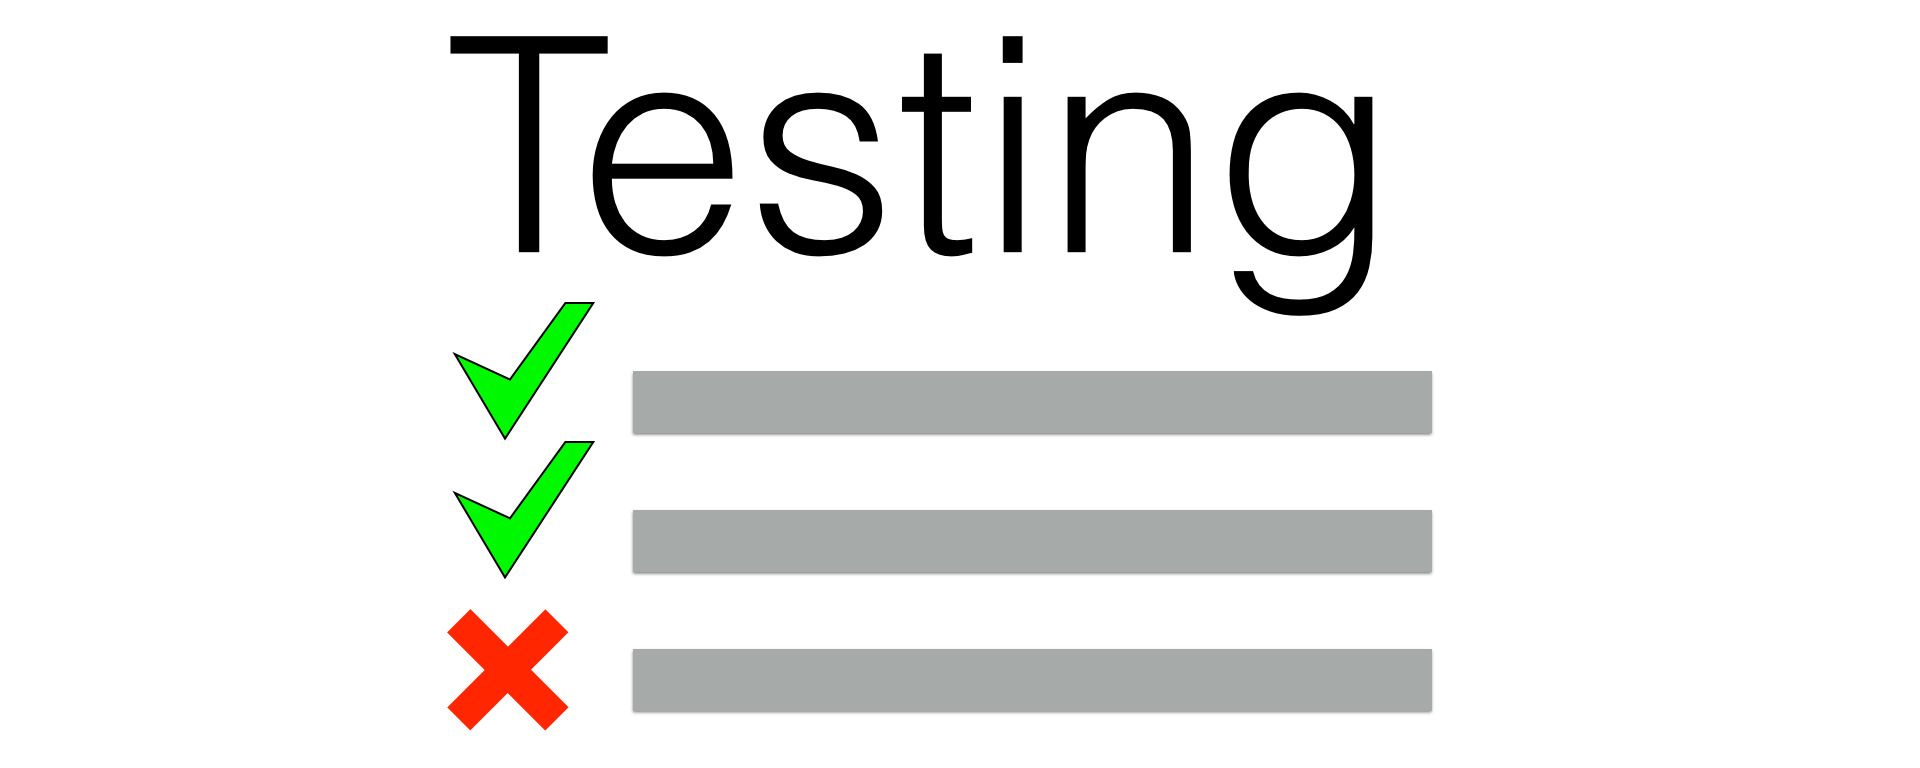 Testing sign with two green checkmarks and one red X mark